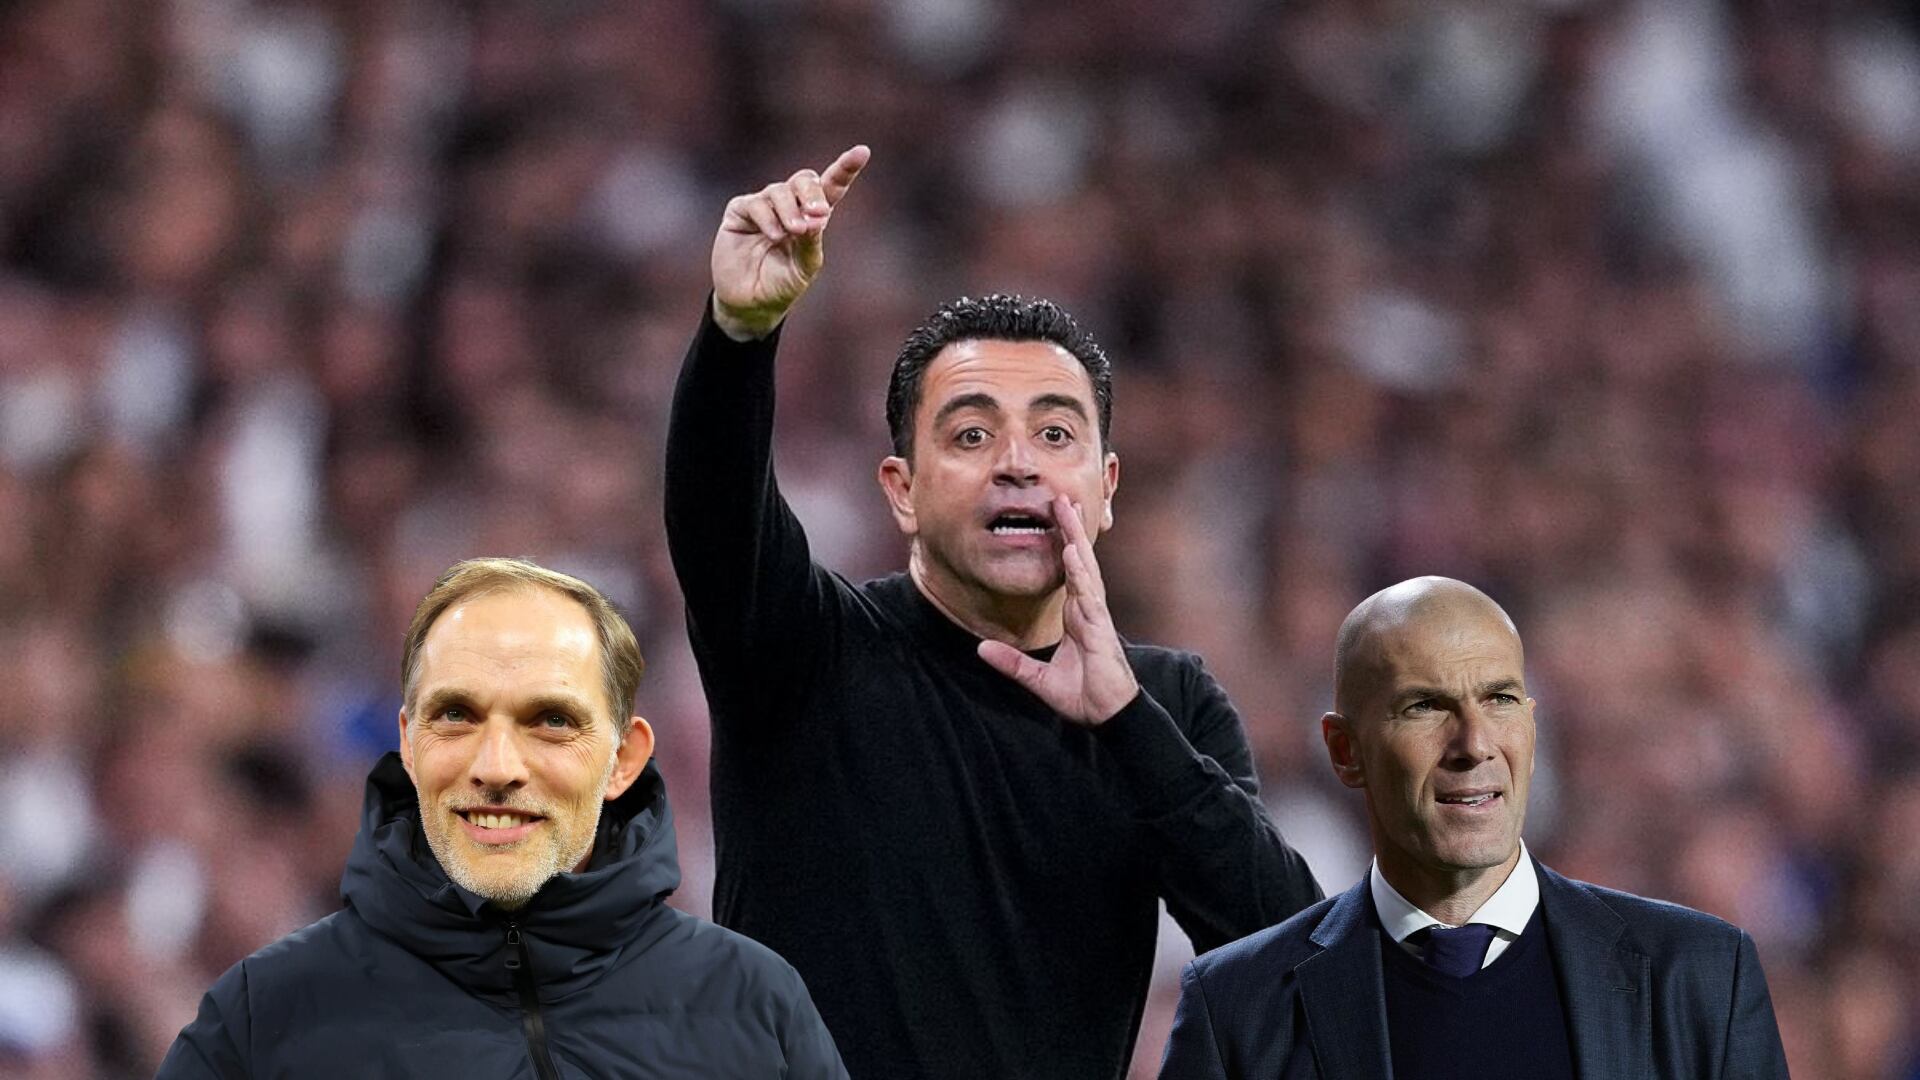 Like Xavi in Barcelona, Tuchel would stay at Bayern & this would happen with Zidane who was favorite to replace him